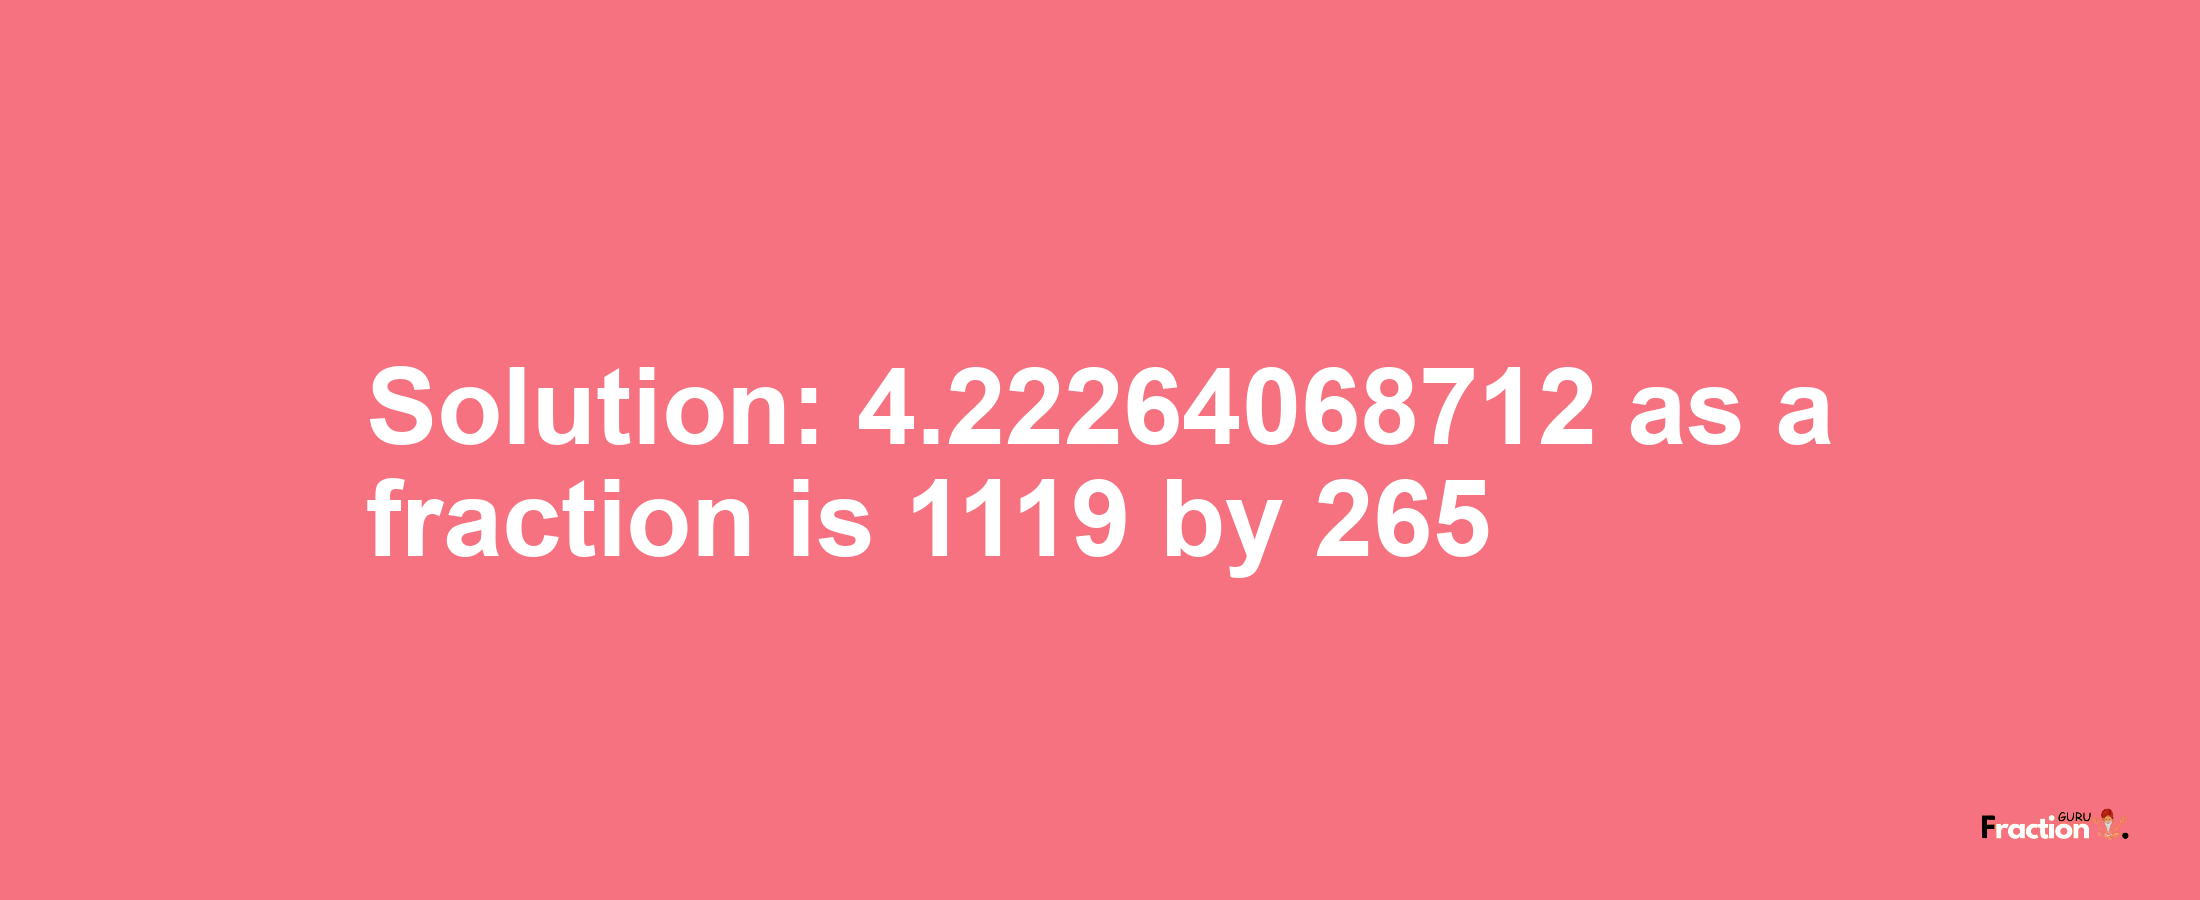 Solution:4.22264068712 as a fraction is 1119/265